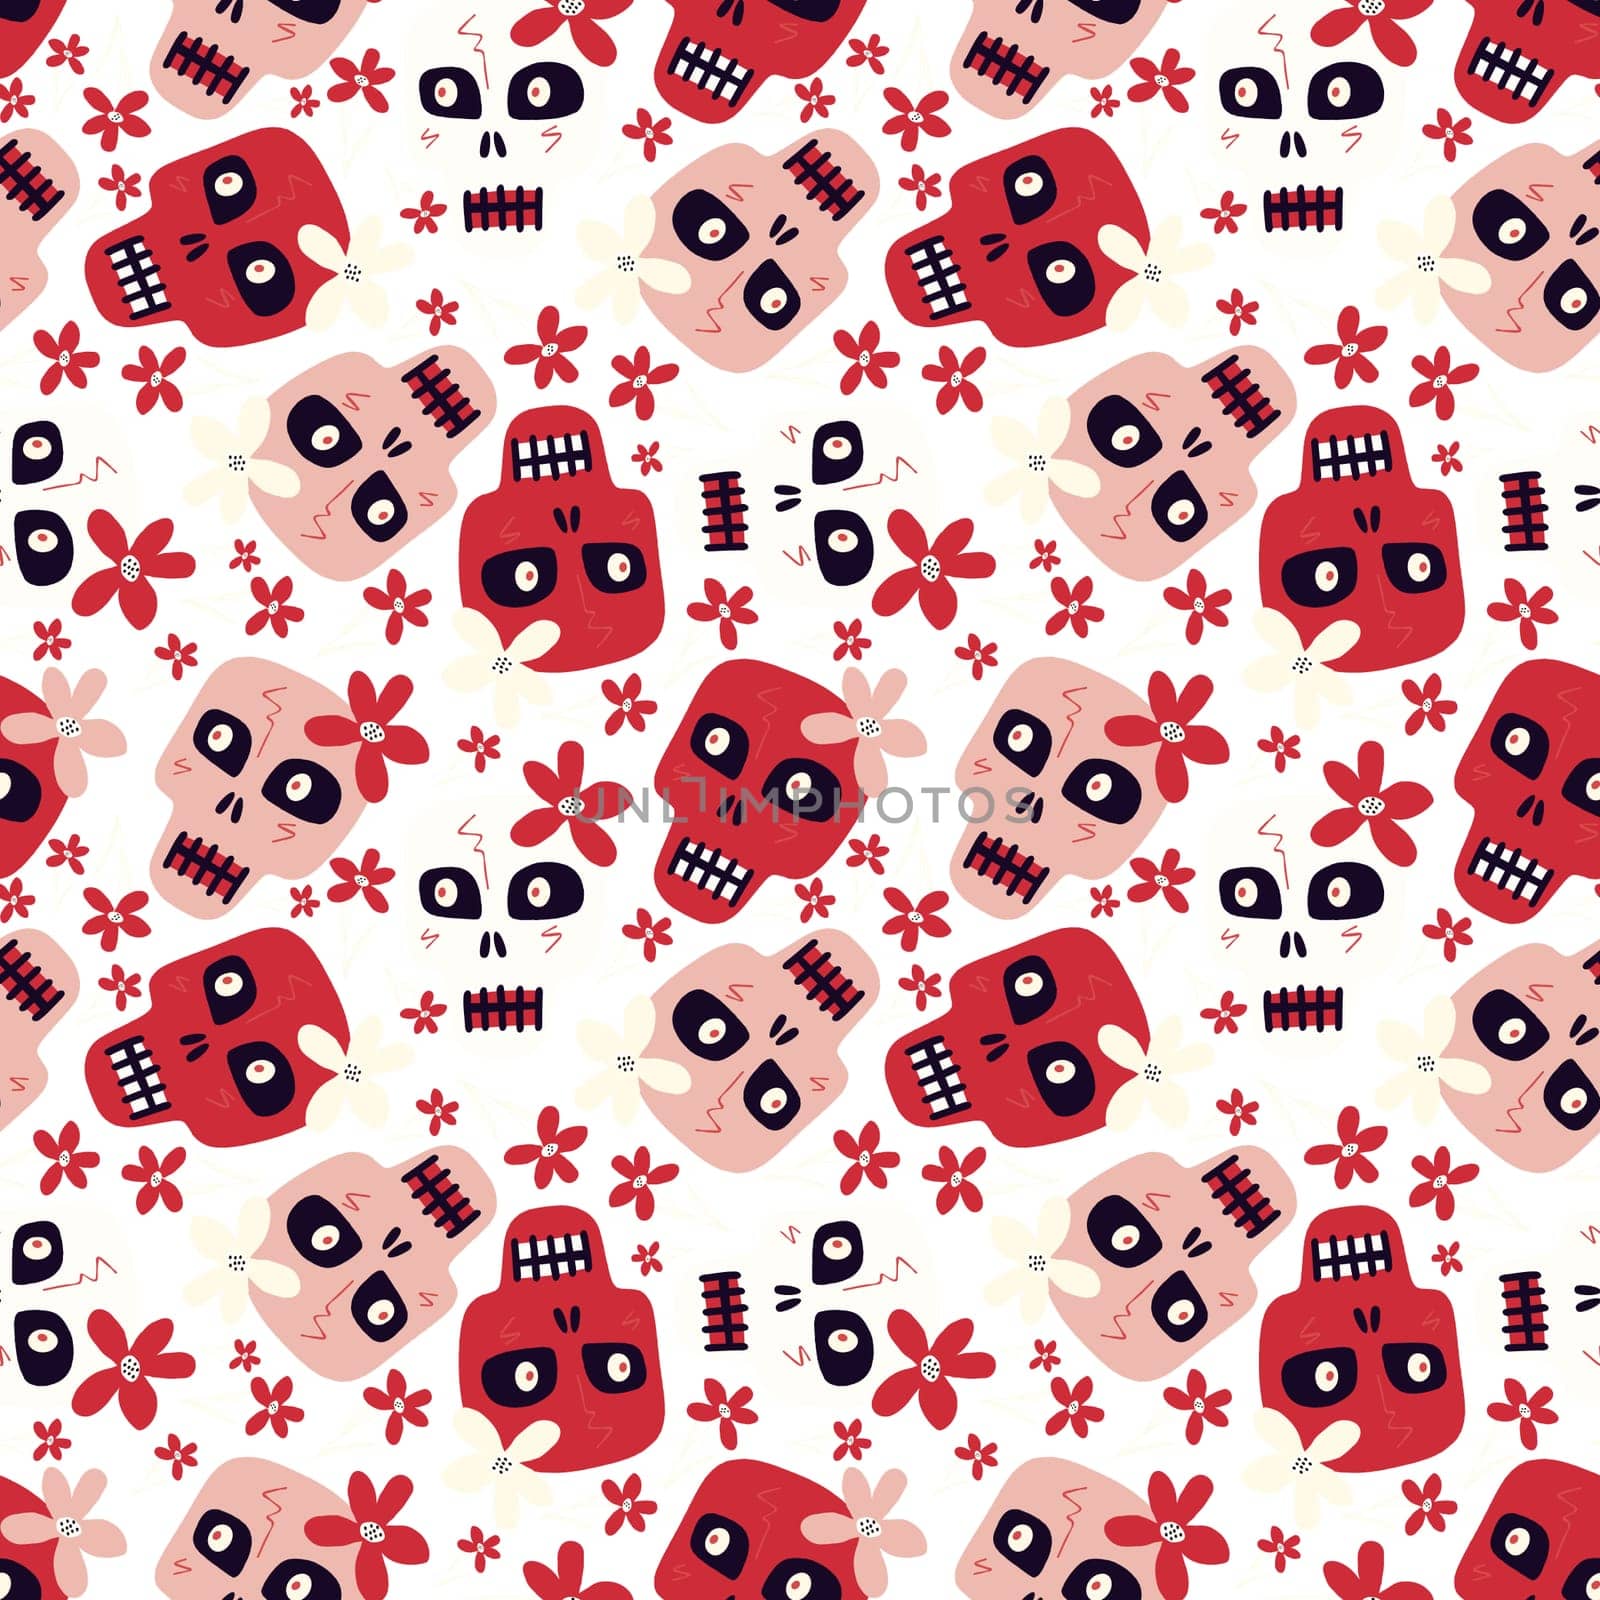 Pink and red Halloween cute cartoon seamless pattern with funny skulls with a flowers